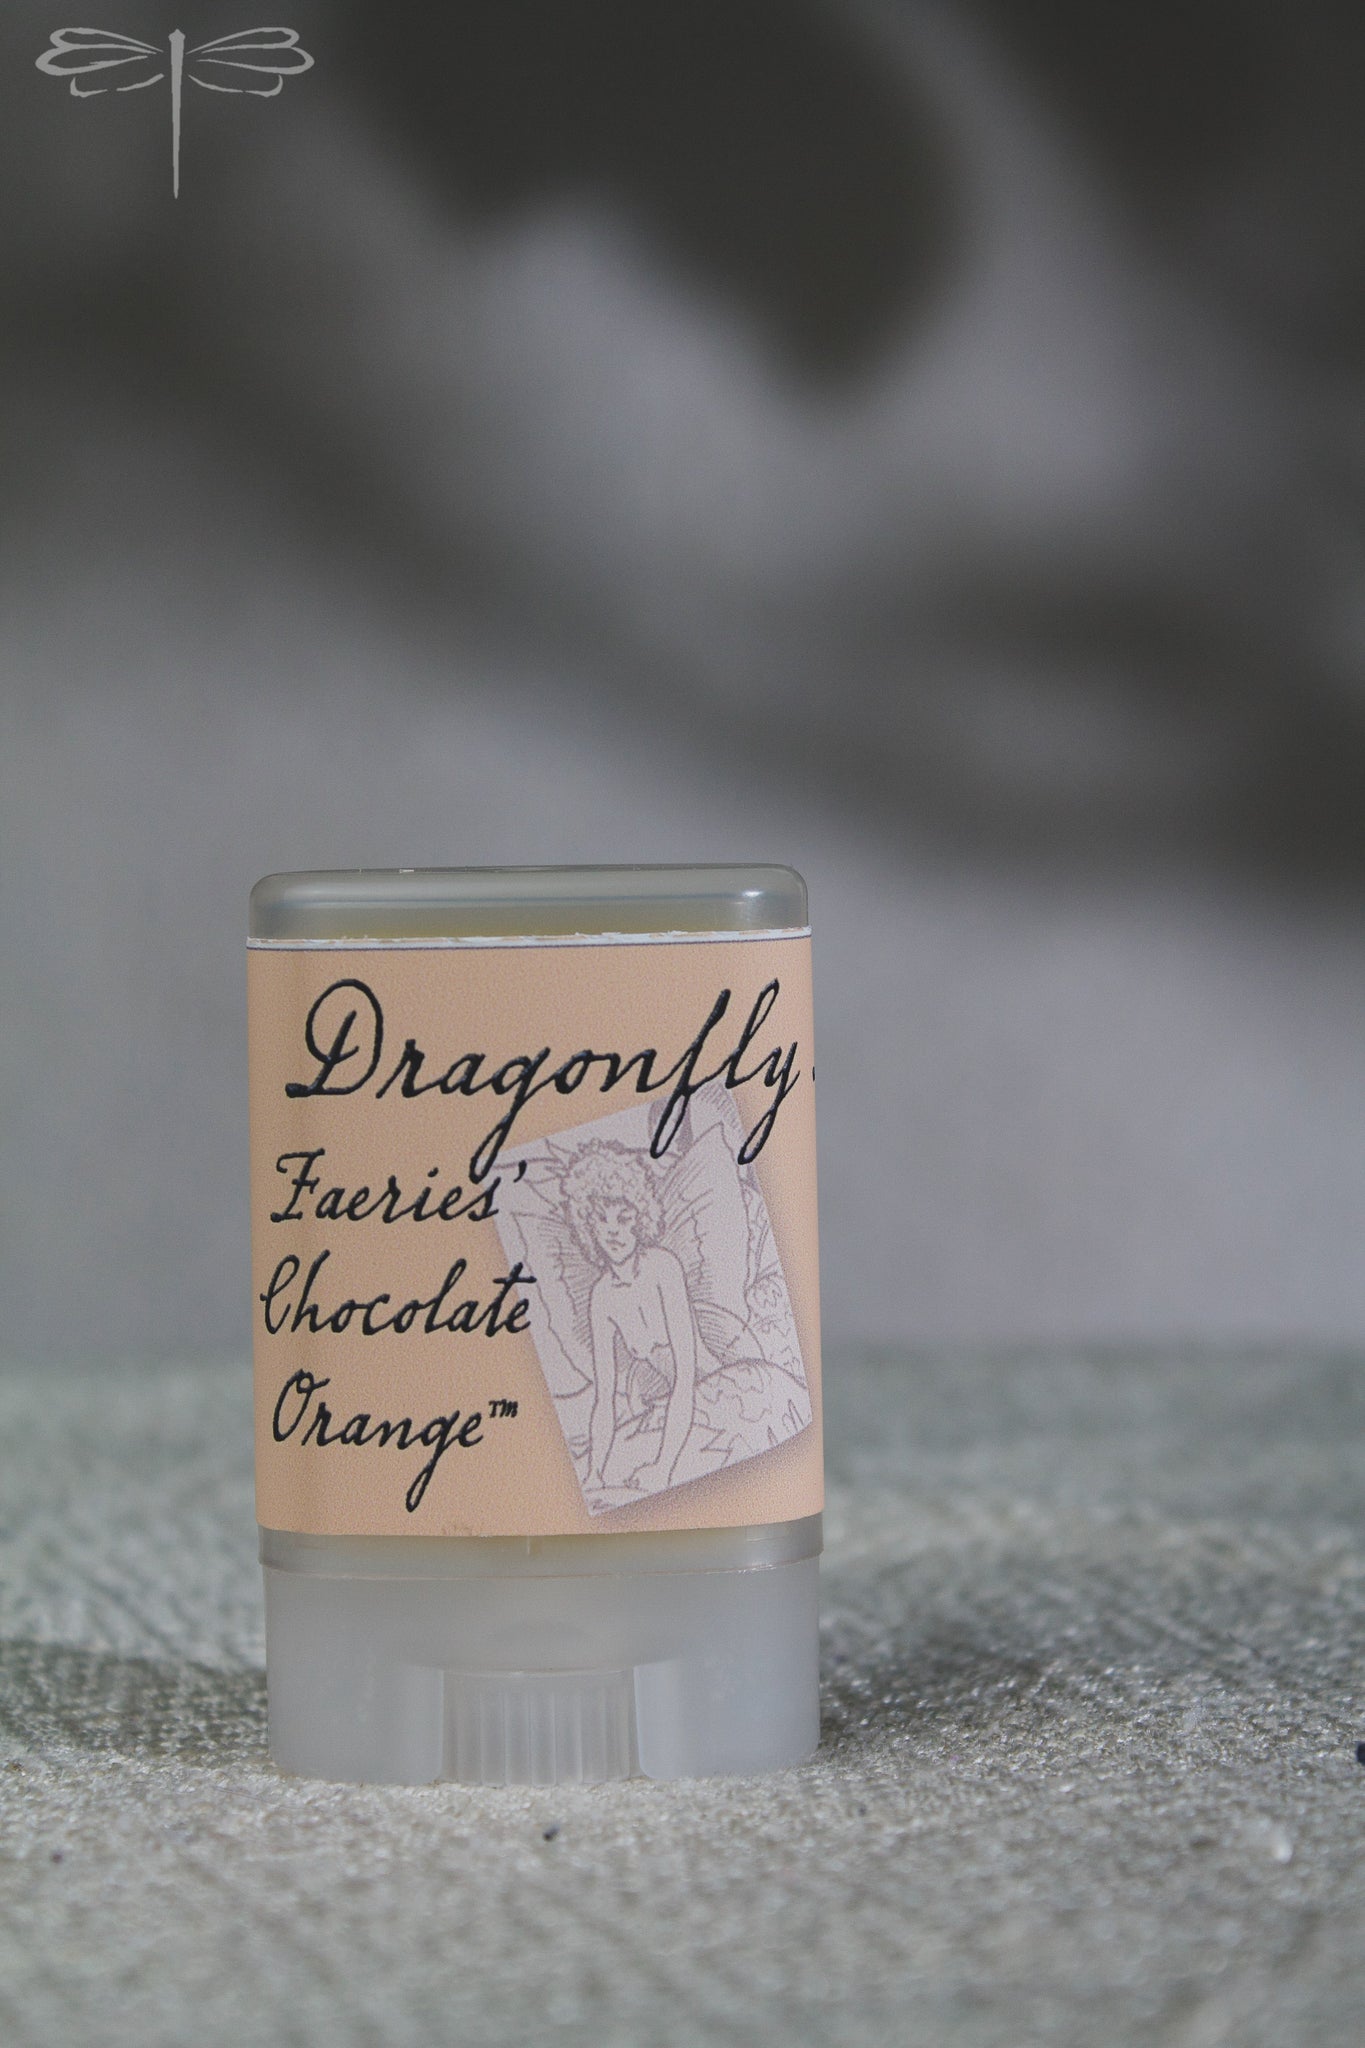 Pictured here, Faeries Chocolate Orange Organic Lip Balm by Dragonfly Dreaming Organics